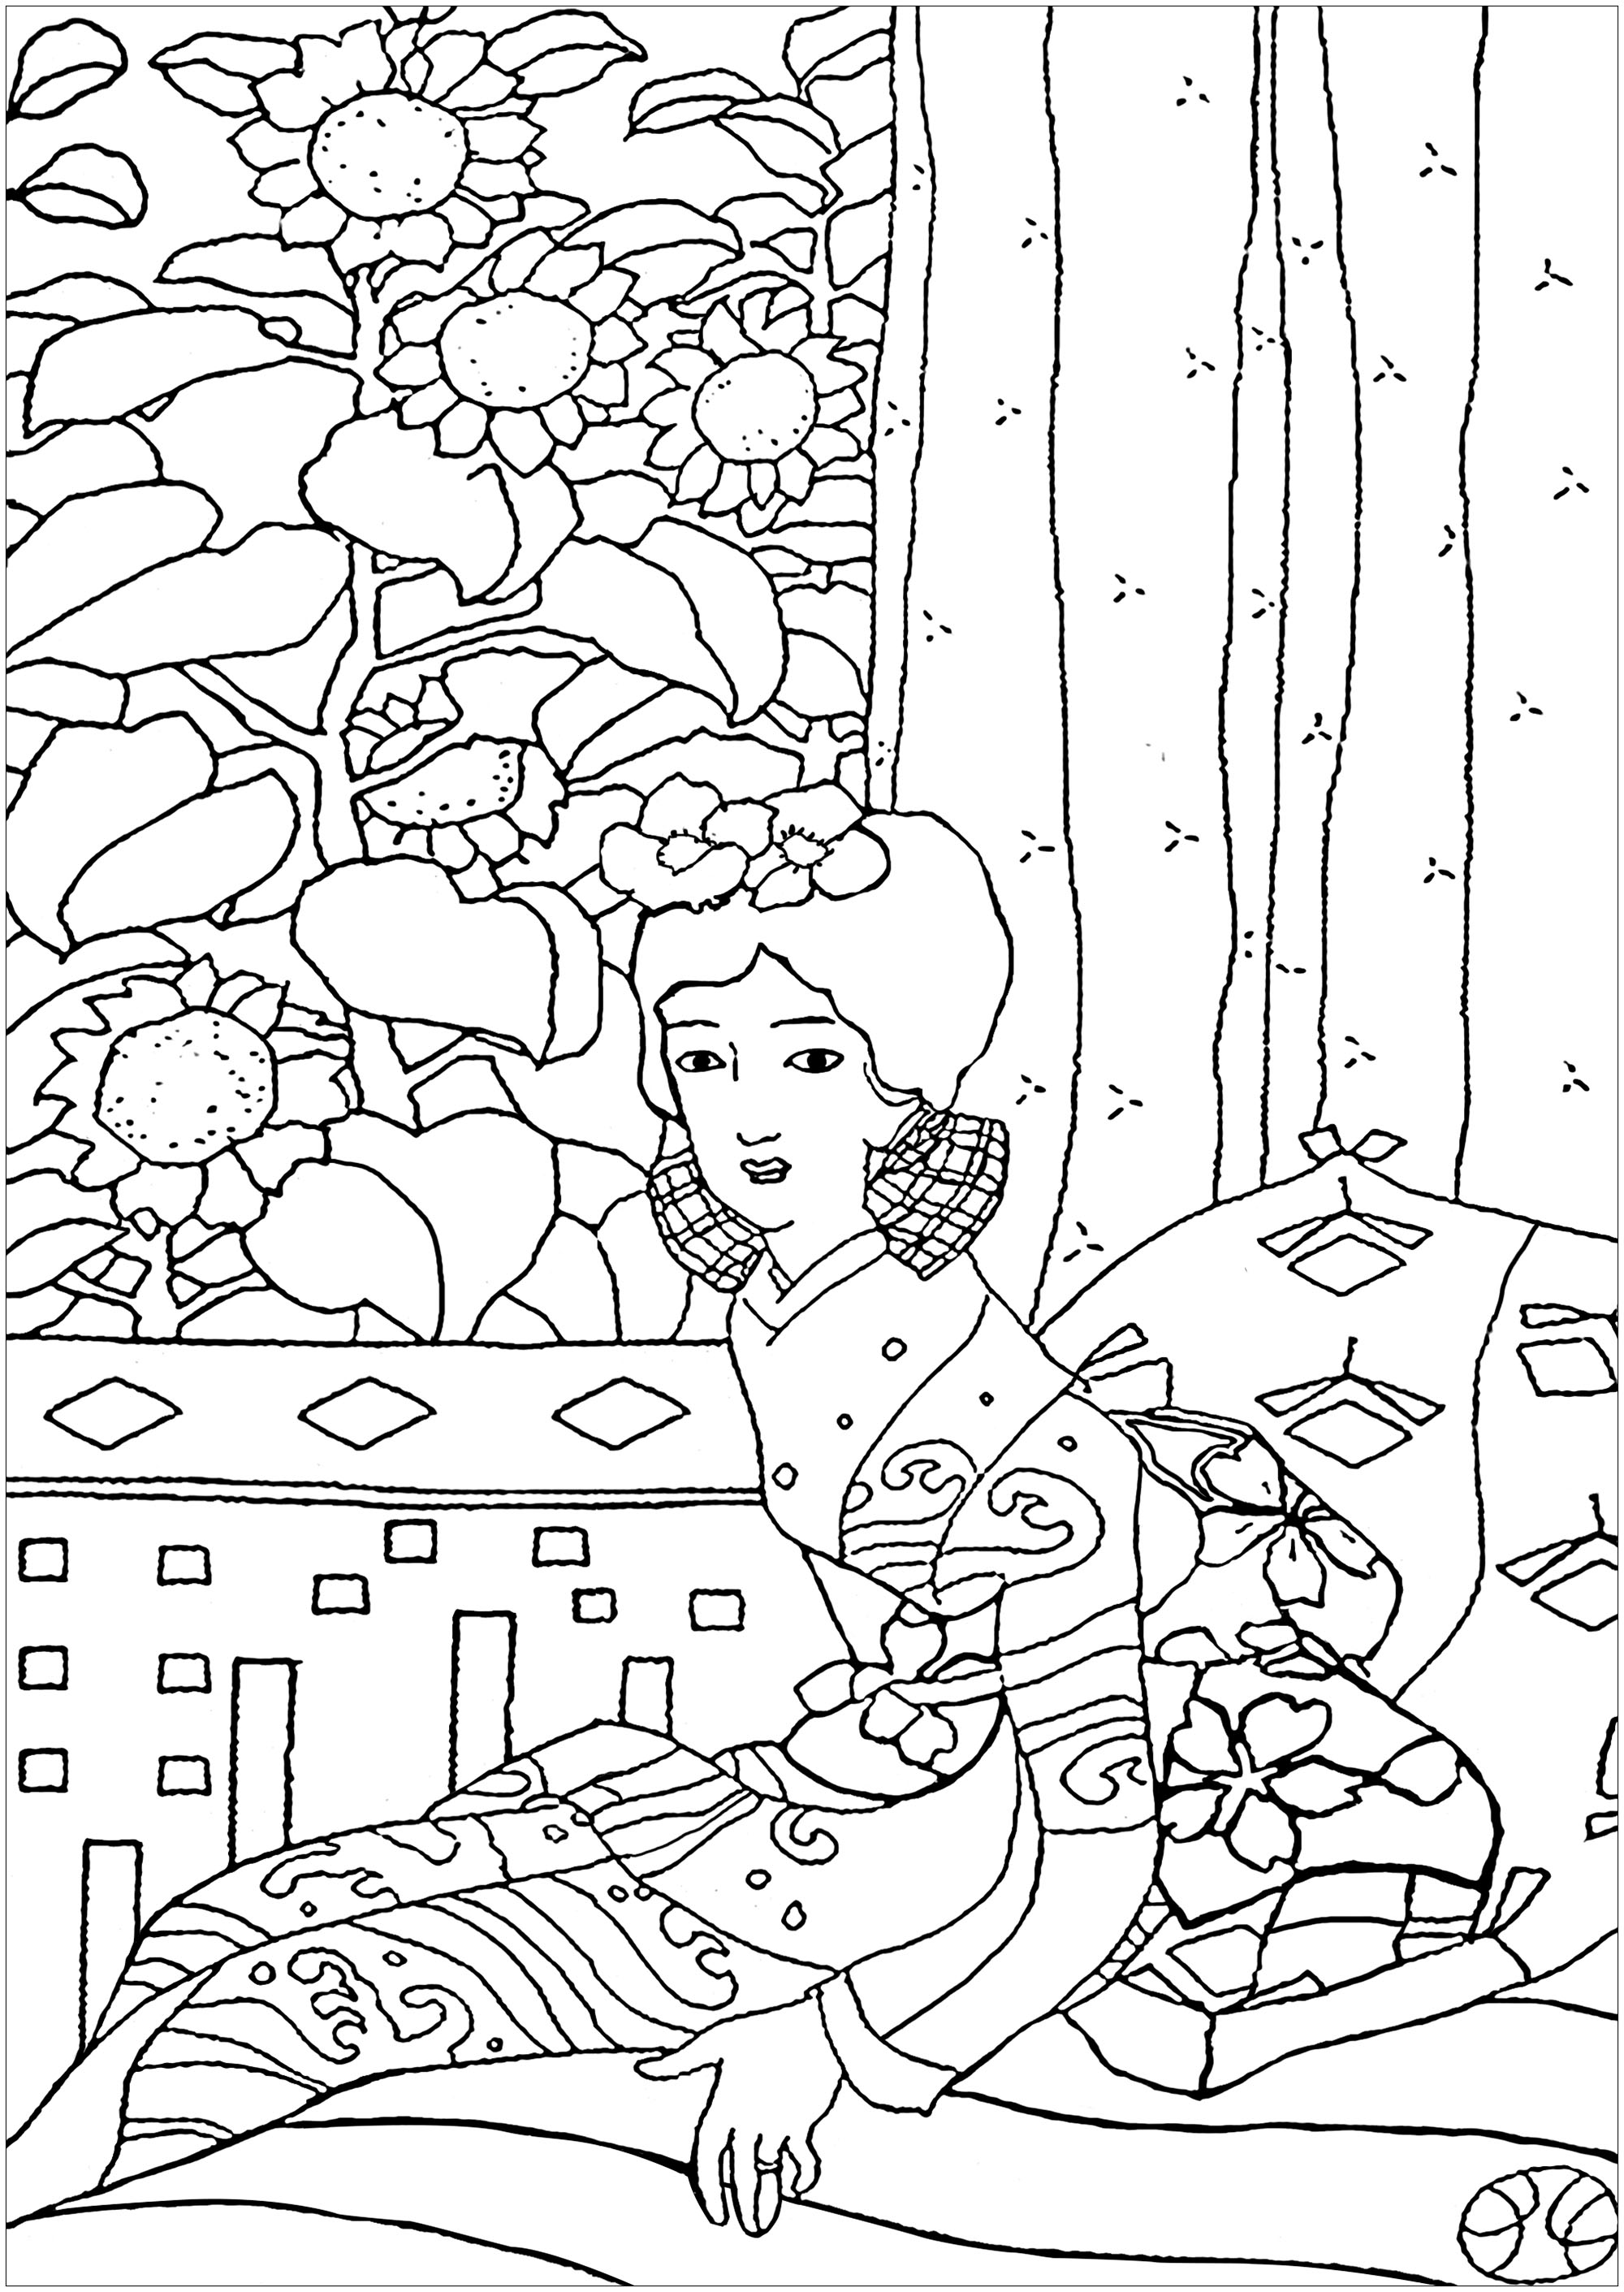 Coloring page created from a painting representing a Geisha, by japanese artist Yumeji Takehisa (1884 - 1934), Artist : Art. Isabelle